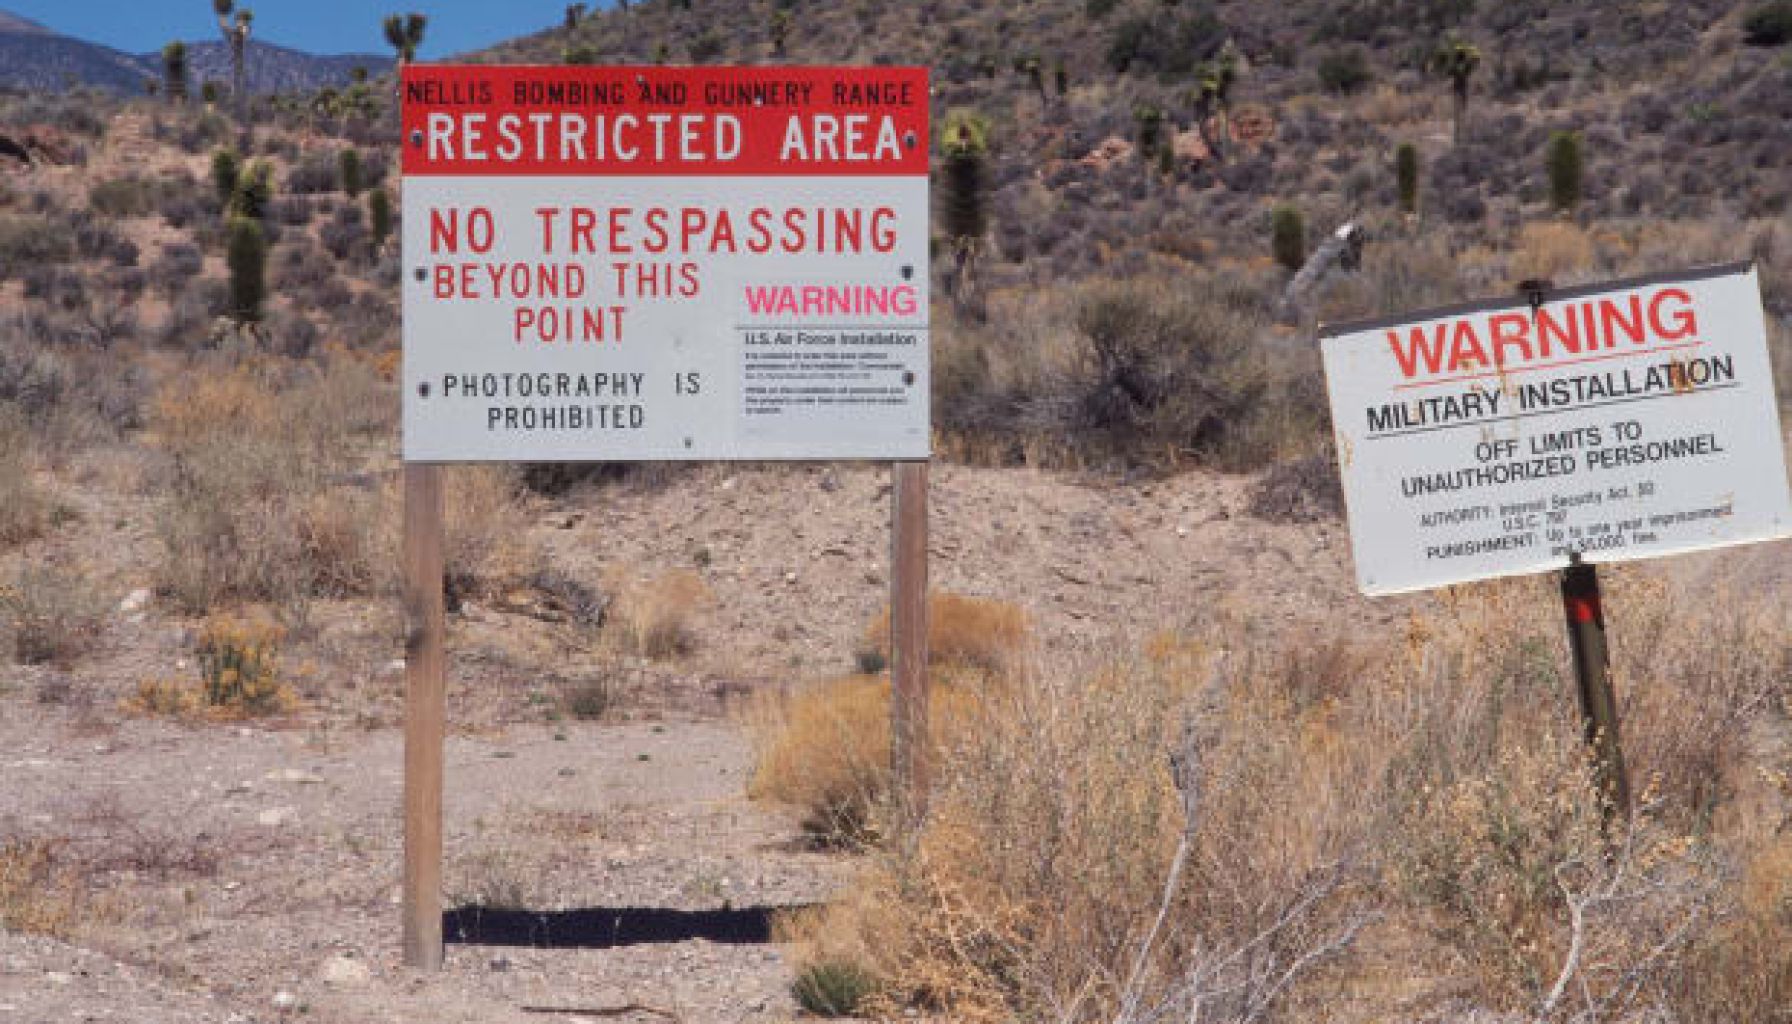 ufos_area-51_restricted-military-area-known-for-alien-incident_corbis-2.jpg